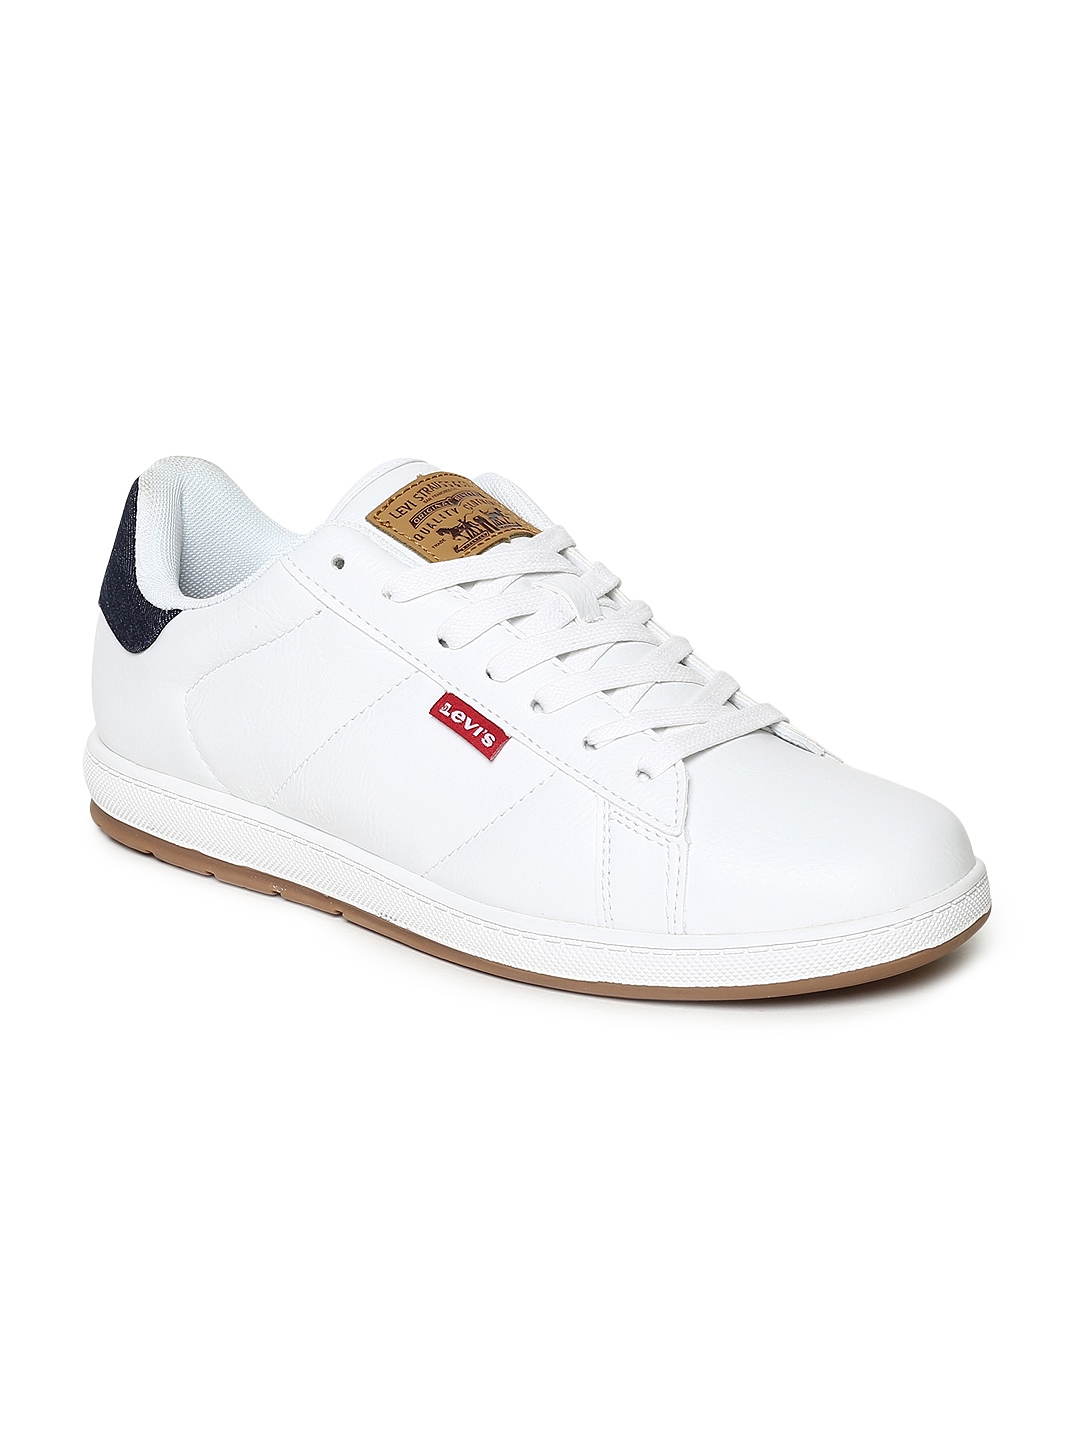 Levis Men White Sneakers - Casual Shoes 